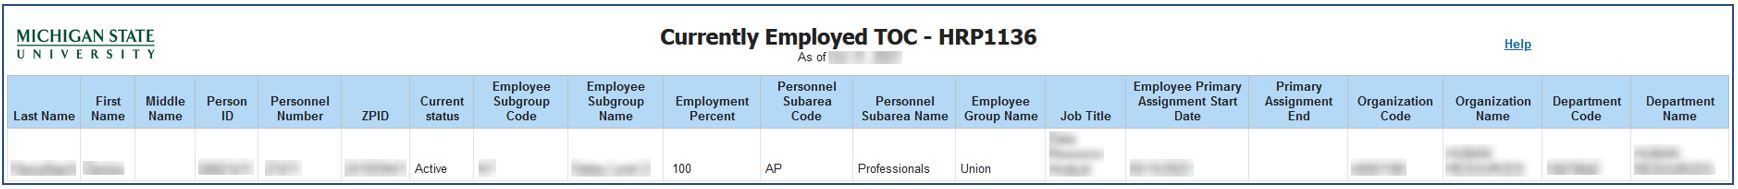 Currently Employed TOC report